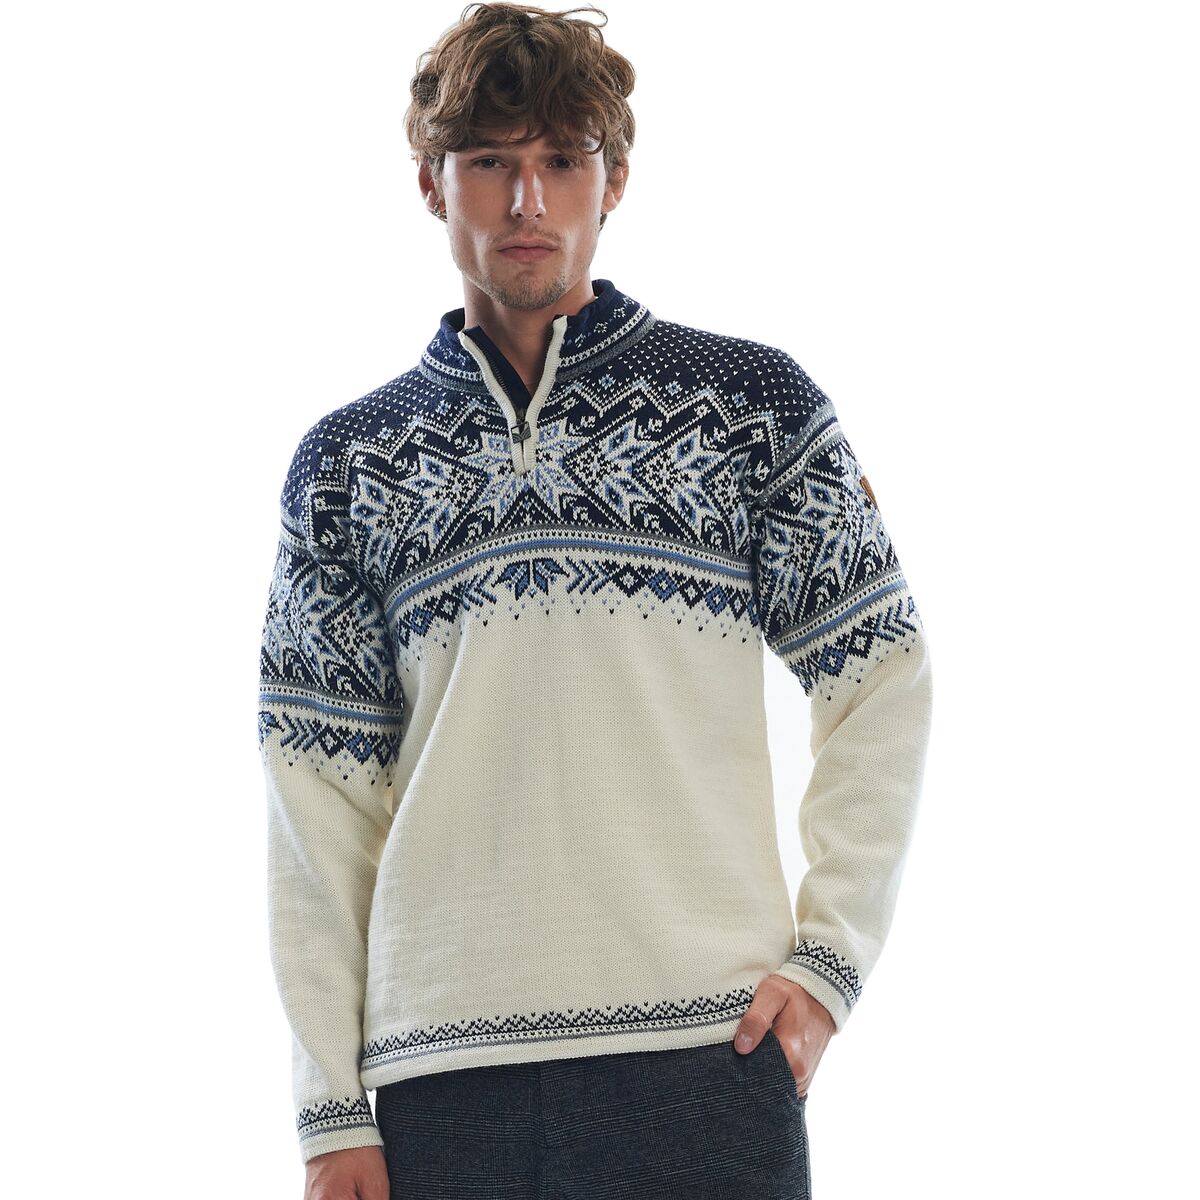 Dale of Norway Vail Sweater - Men's